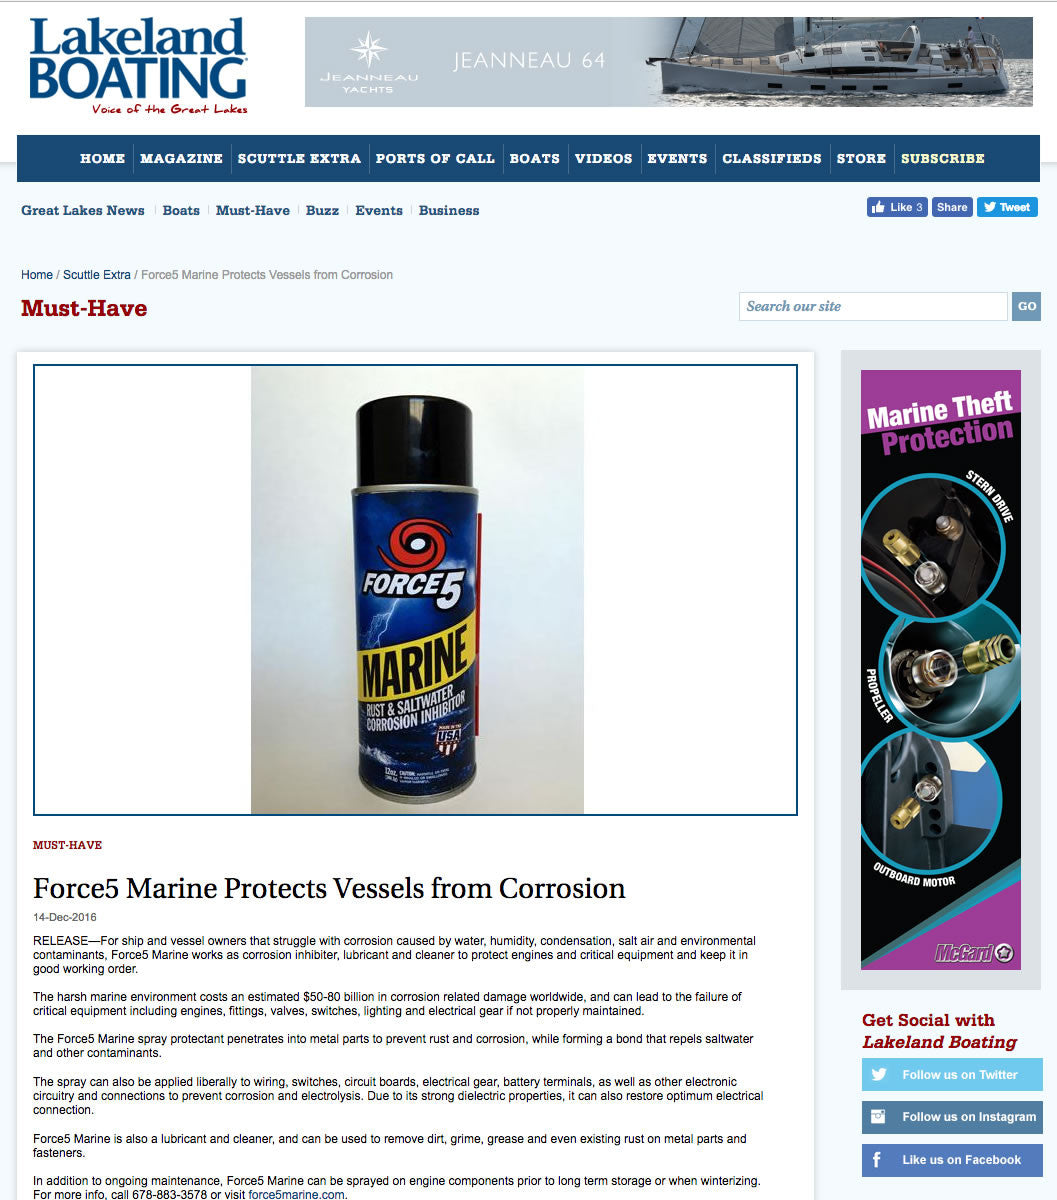 Force5 Marine Protects Vessels from Corrosion